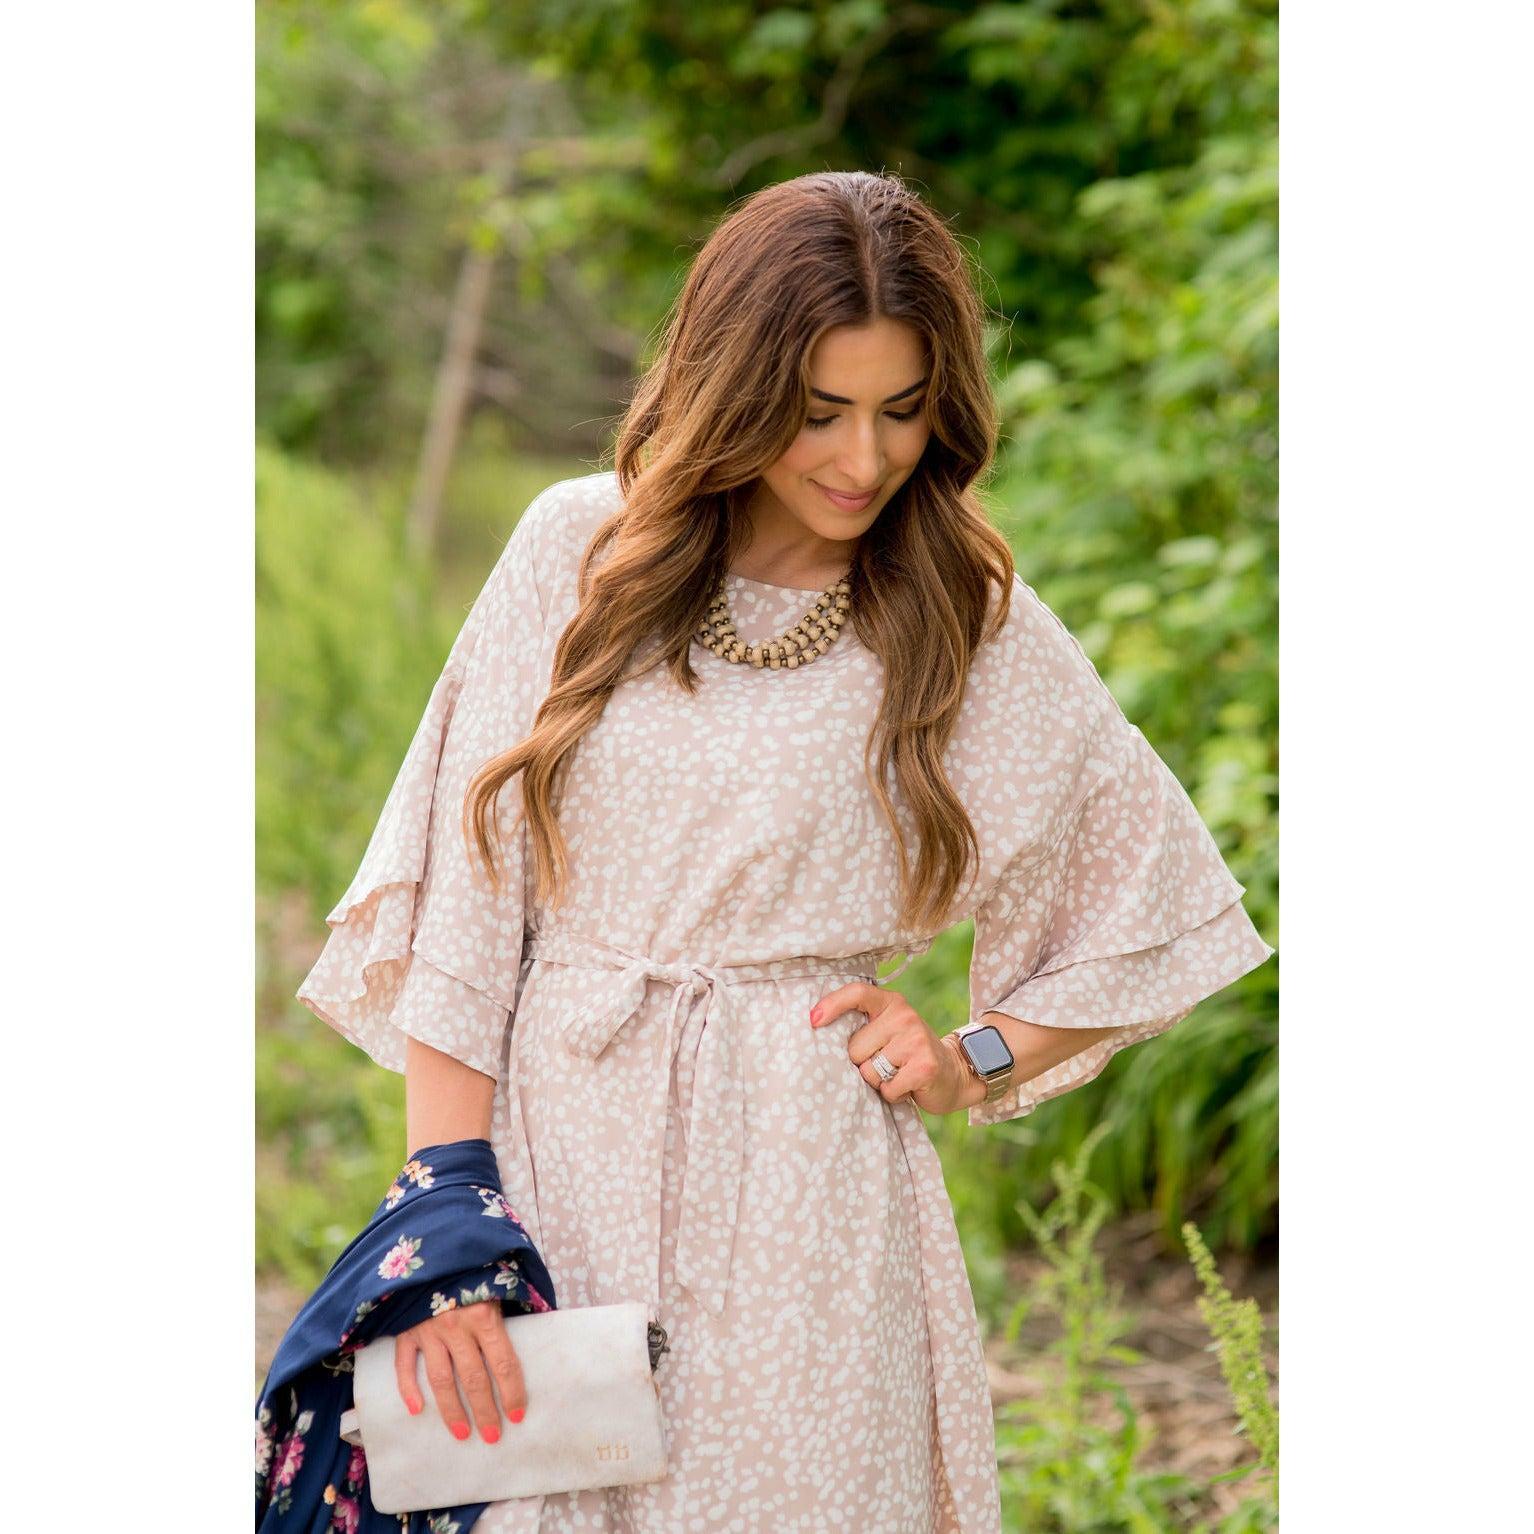 Speckled Layered Sleeve Dress Product Image